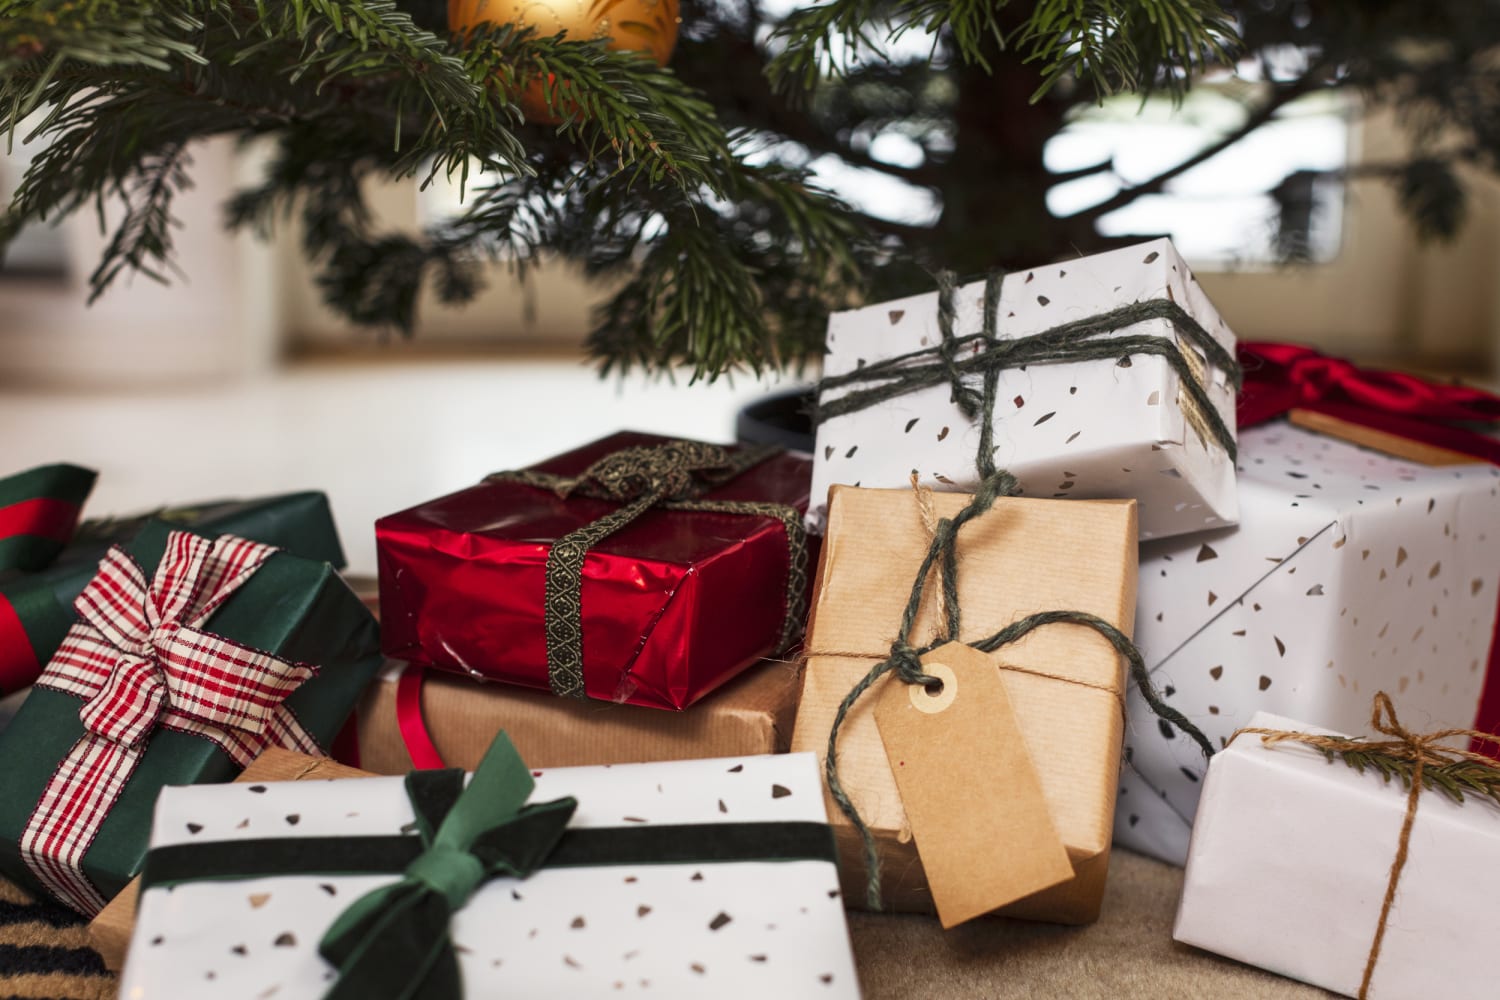 Why the overabundance of the gift-giving season causes me discomfort